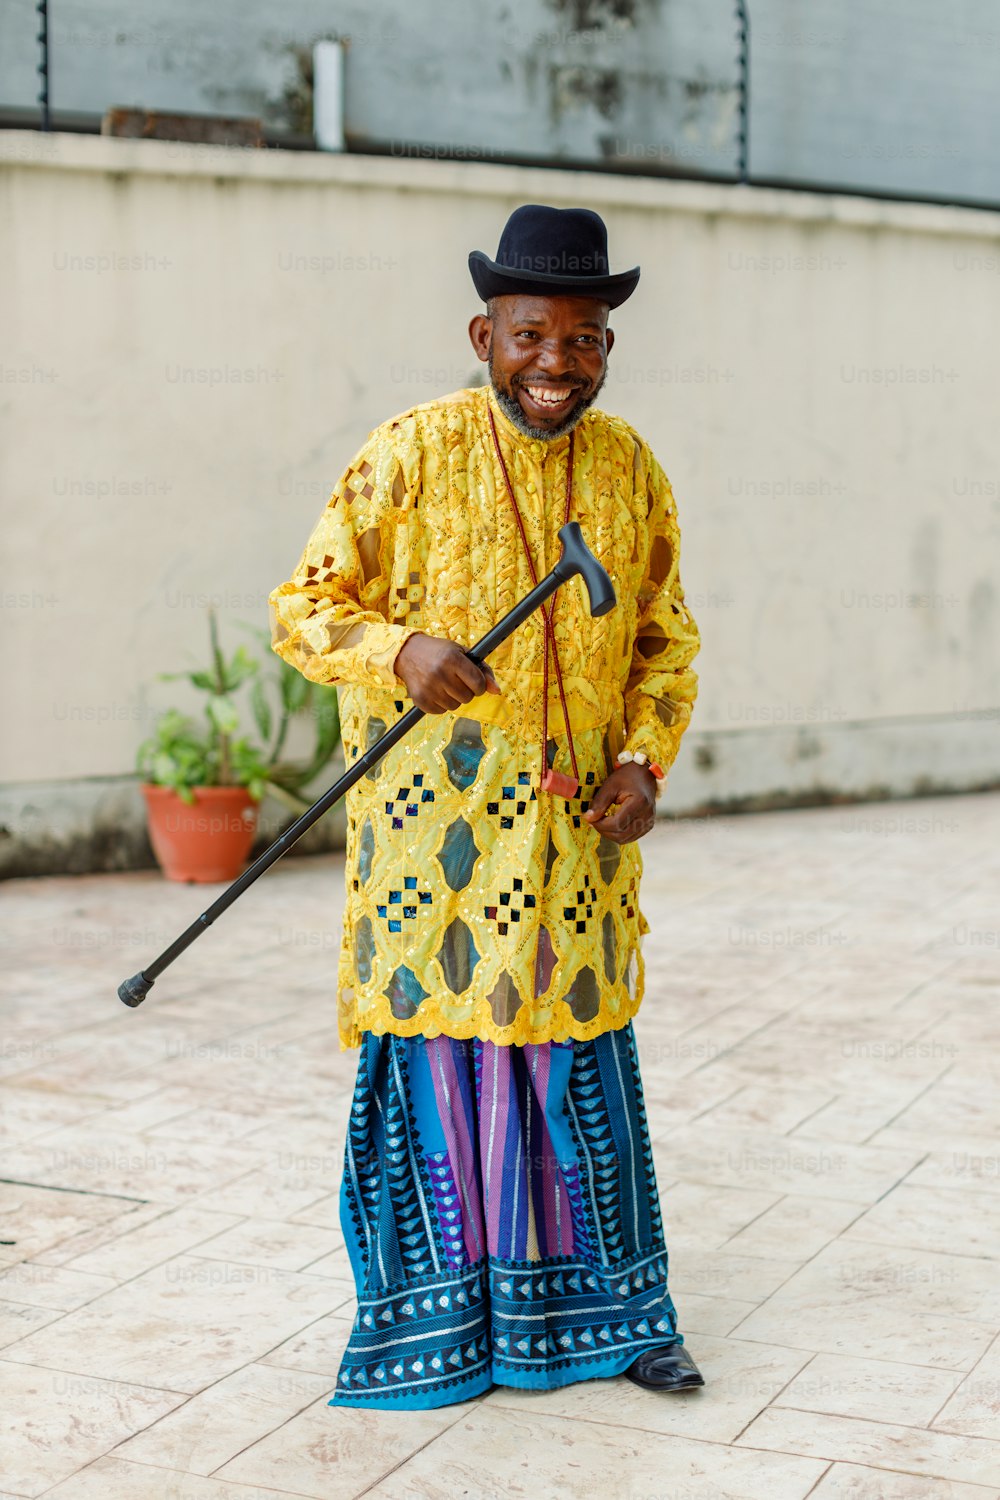 a man in a yellow and blue outfit holding a stick